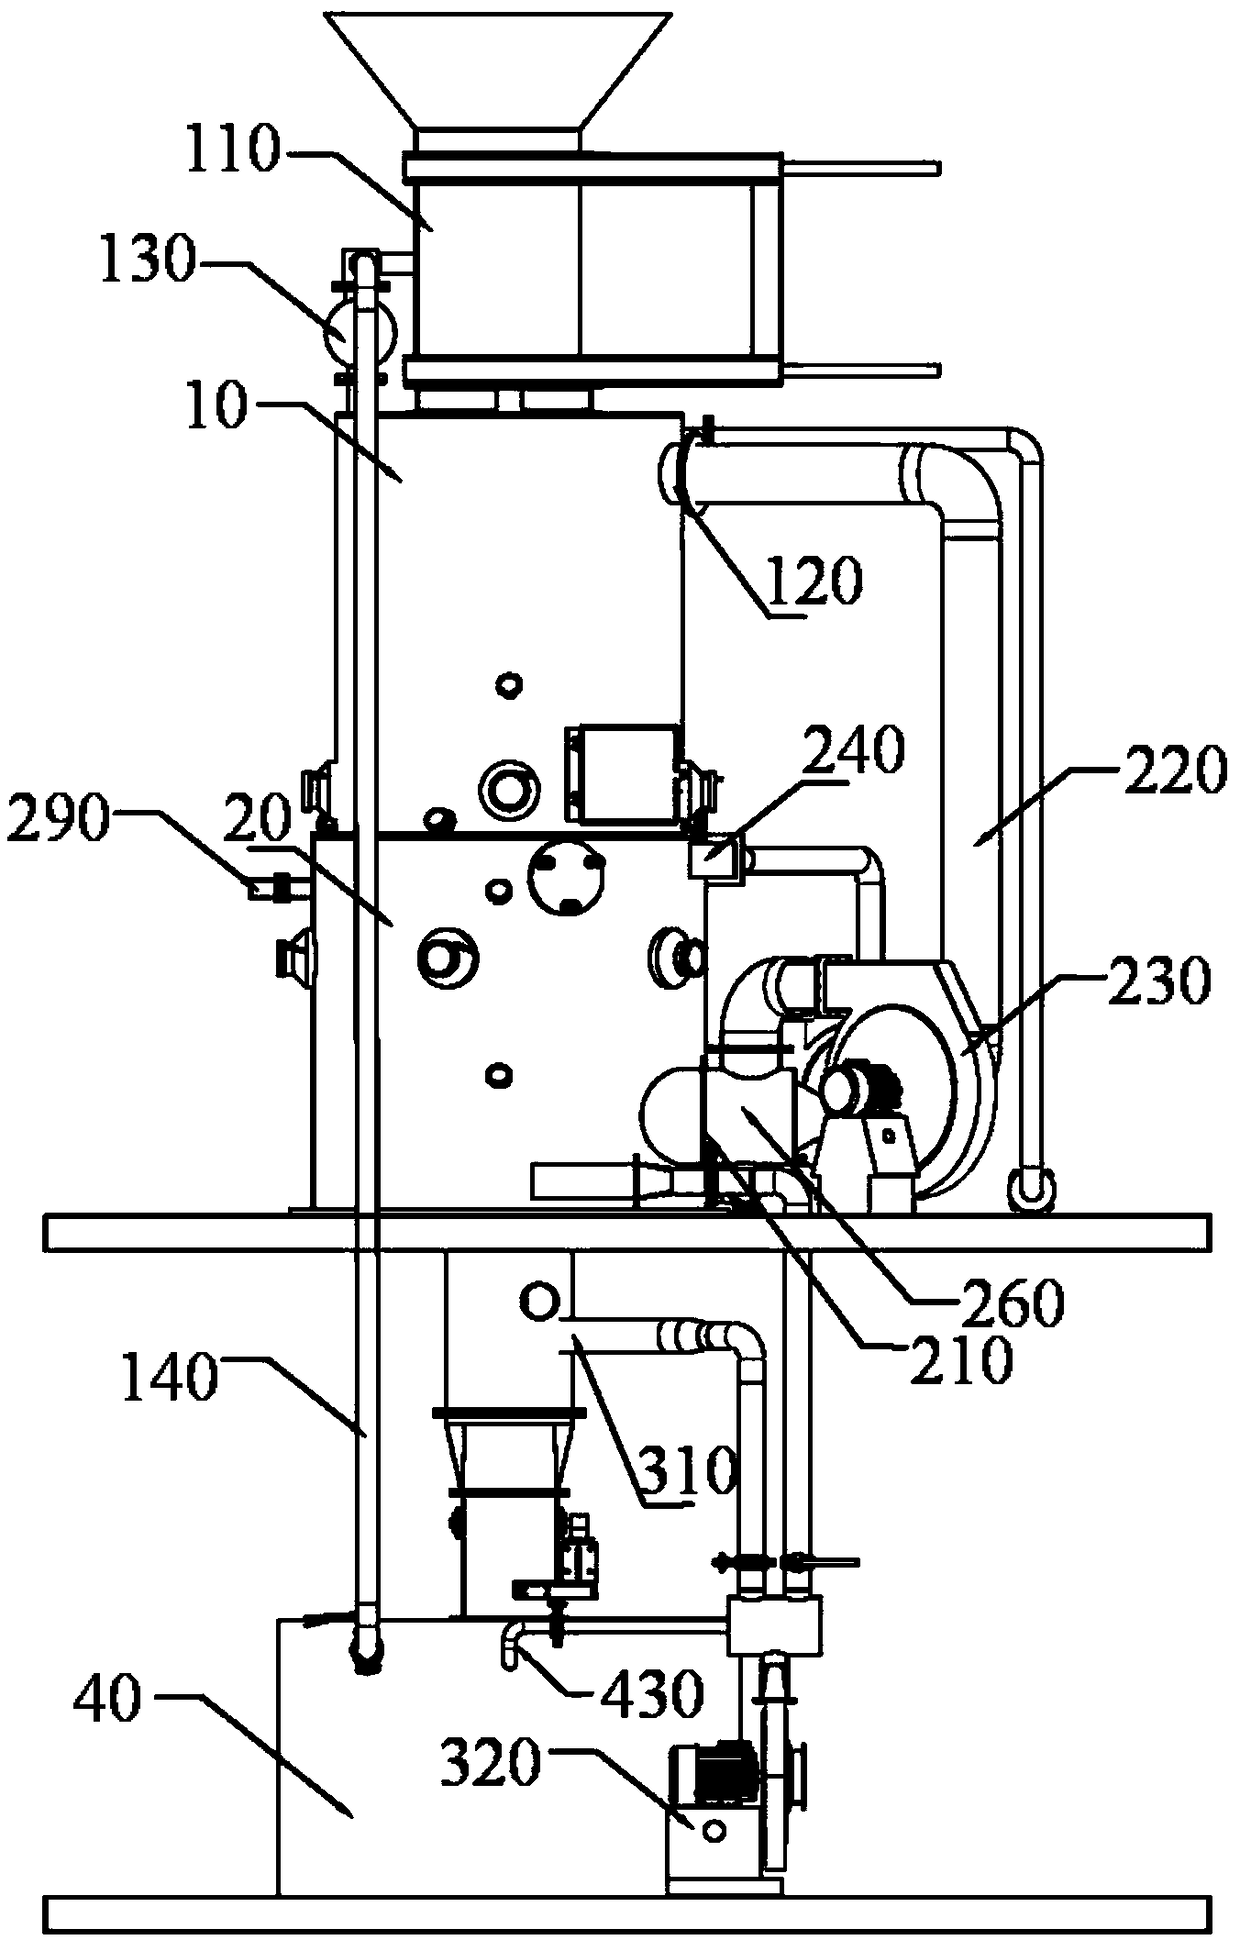 Garbage pyrolysis gasification and secondary combustion chamber integrated device